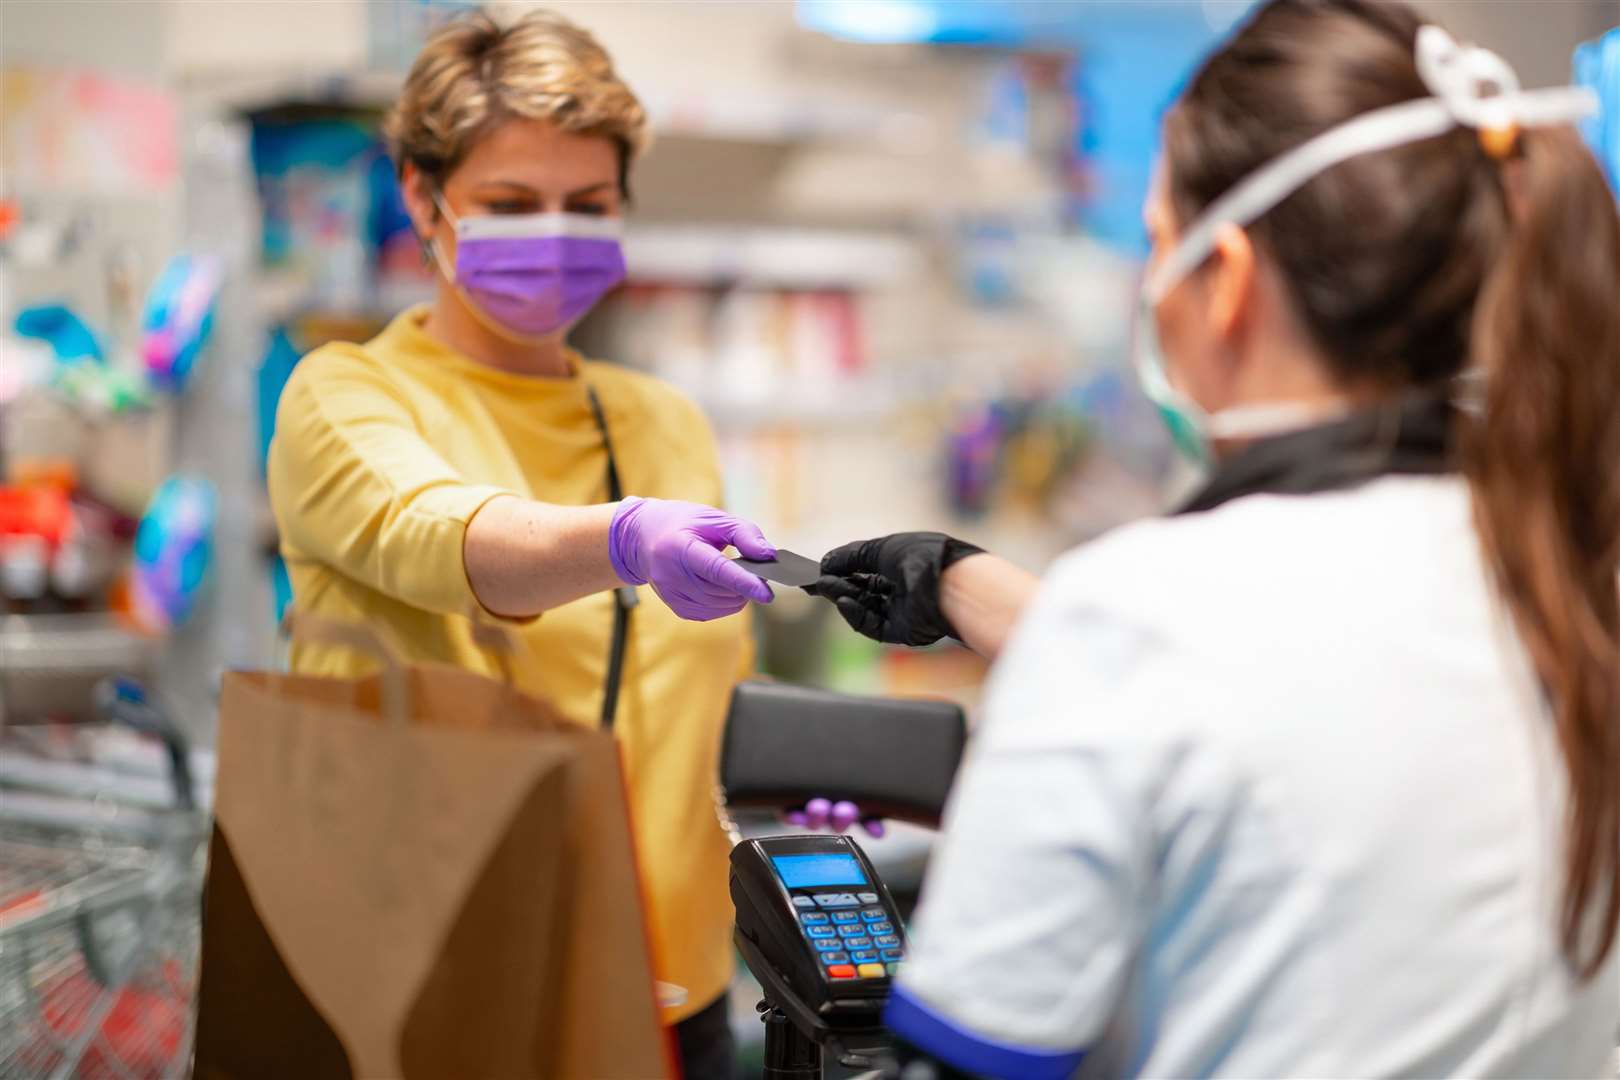 Cashier returning credit card at the cash register to woman with wallet wearing protective face mask and gloves to prevent viruses